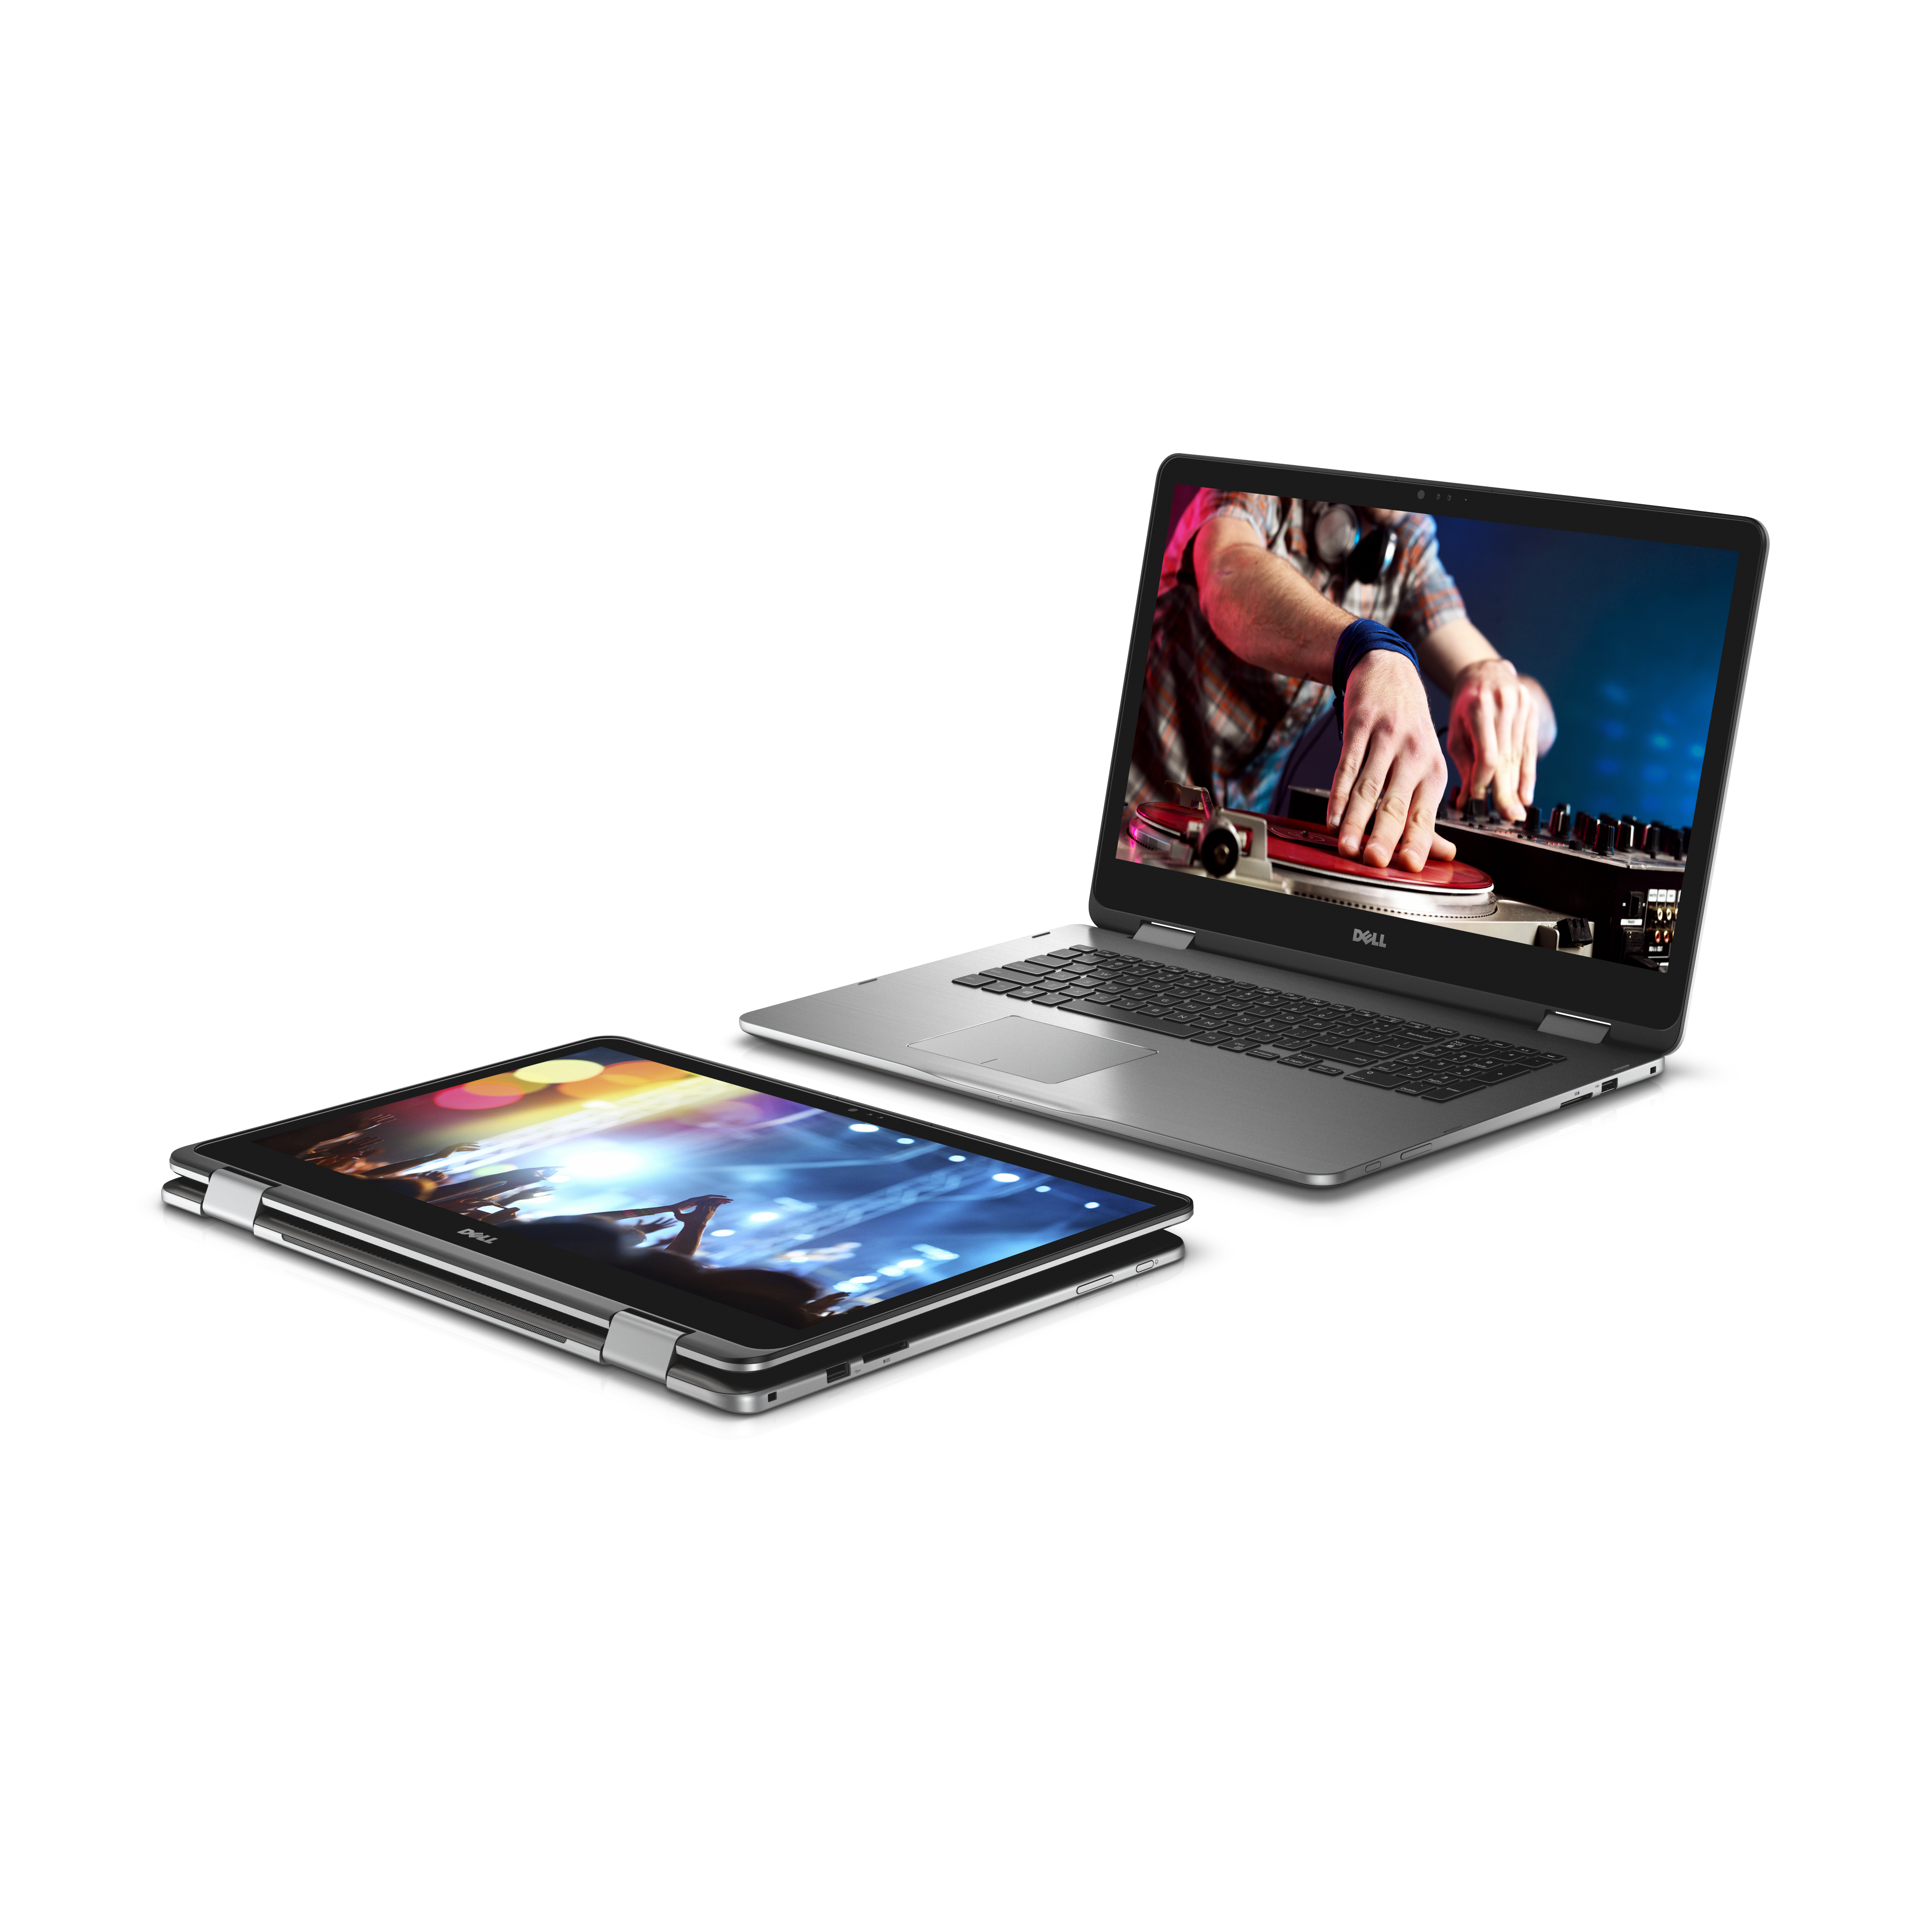 Two Dell Inspiron 17 7000 Series (Model 7778) 2-in-1 Touch notebook computesr, codename Starlord.